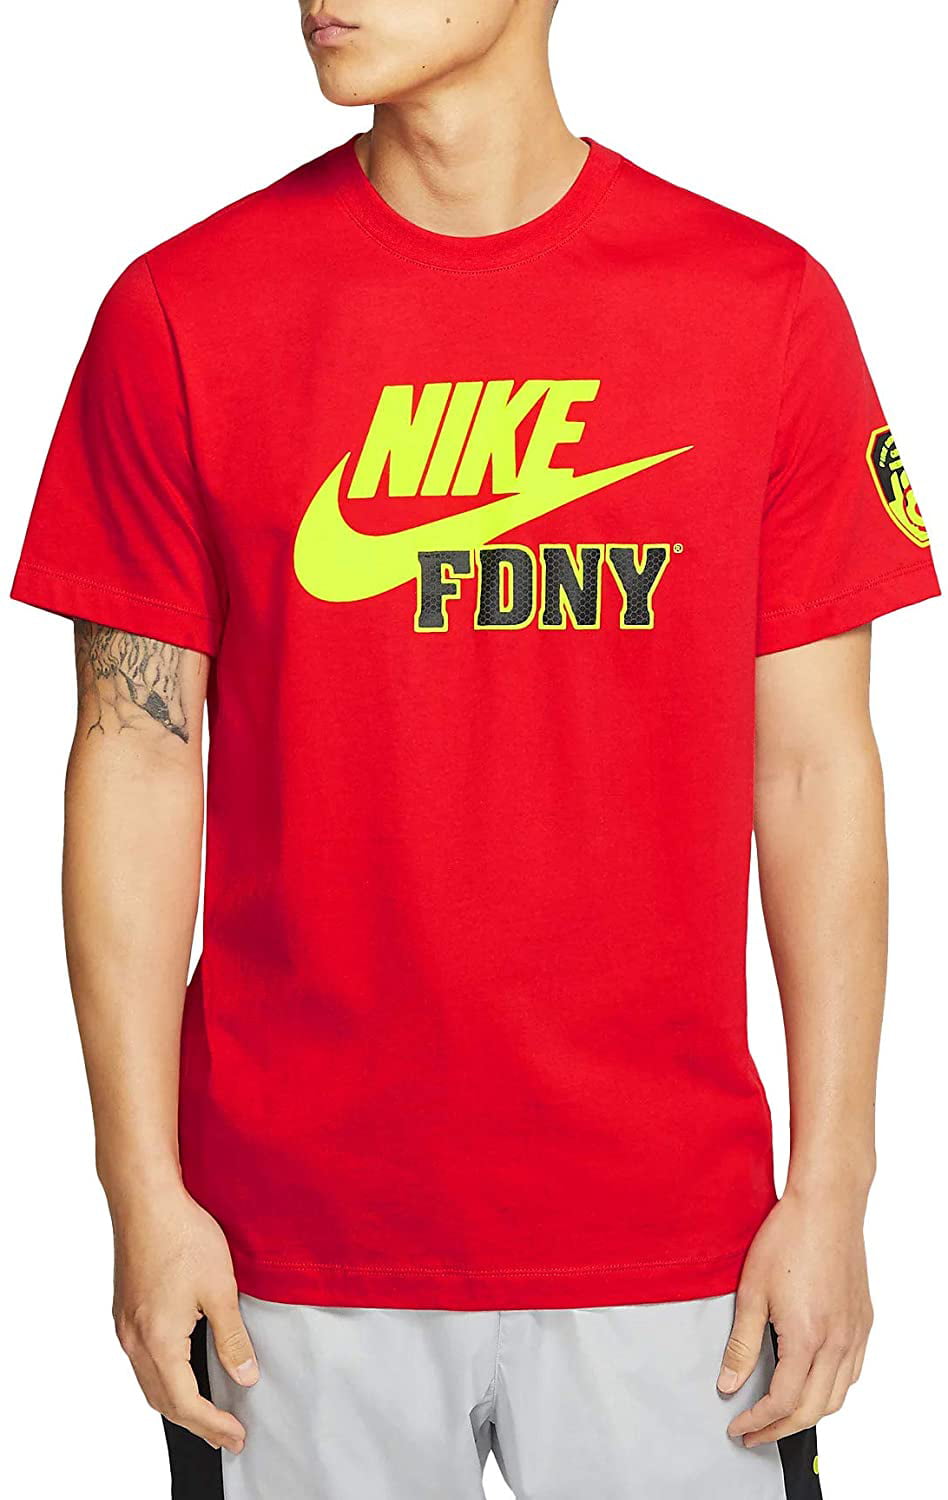 Amphibious canvas Can be calculated Nike Men's NYC FDNY Graphic Sportswear Tee (University Red, Large) -  Walmart.com